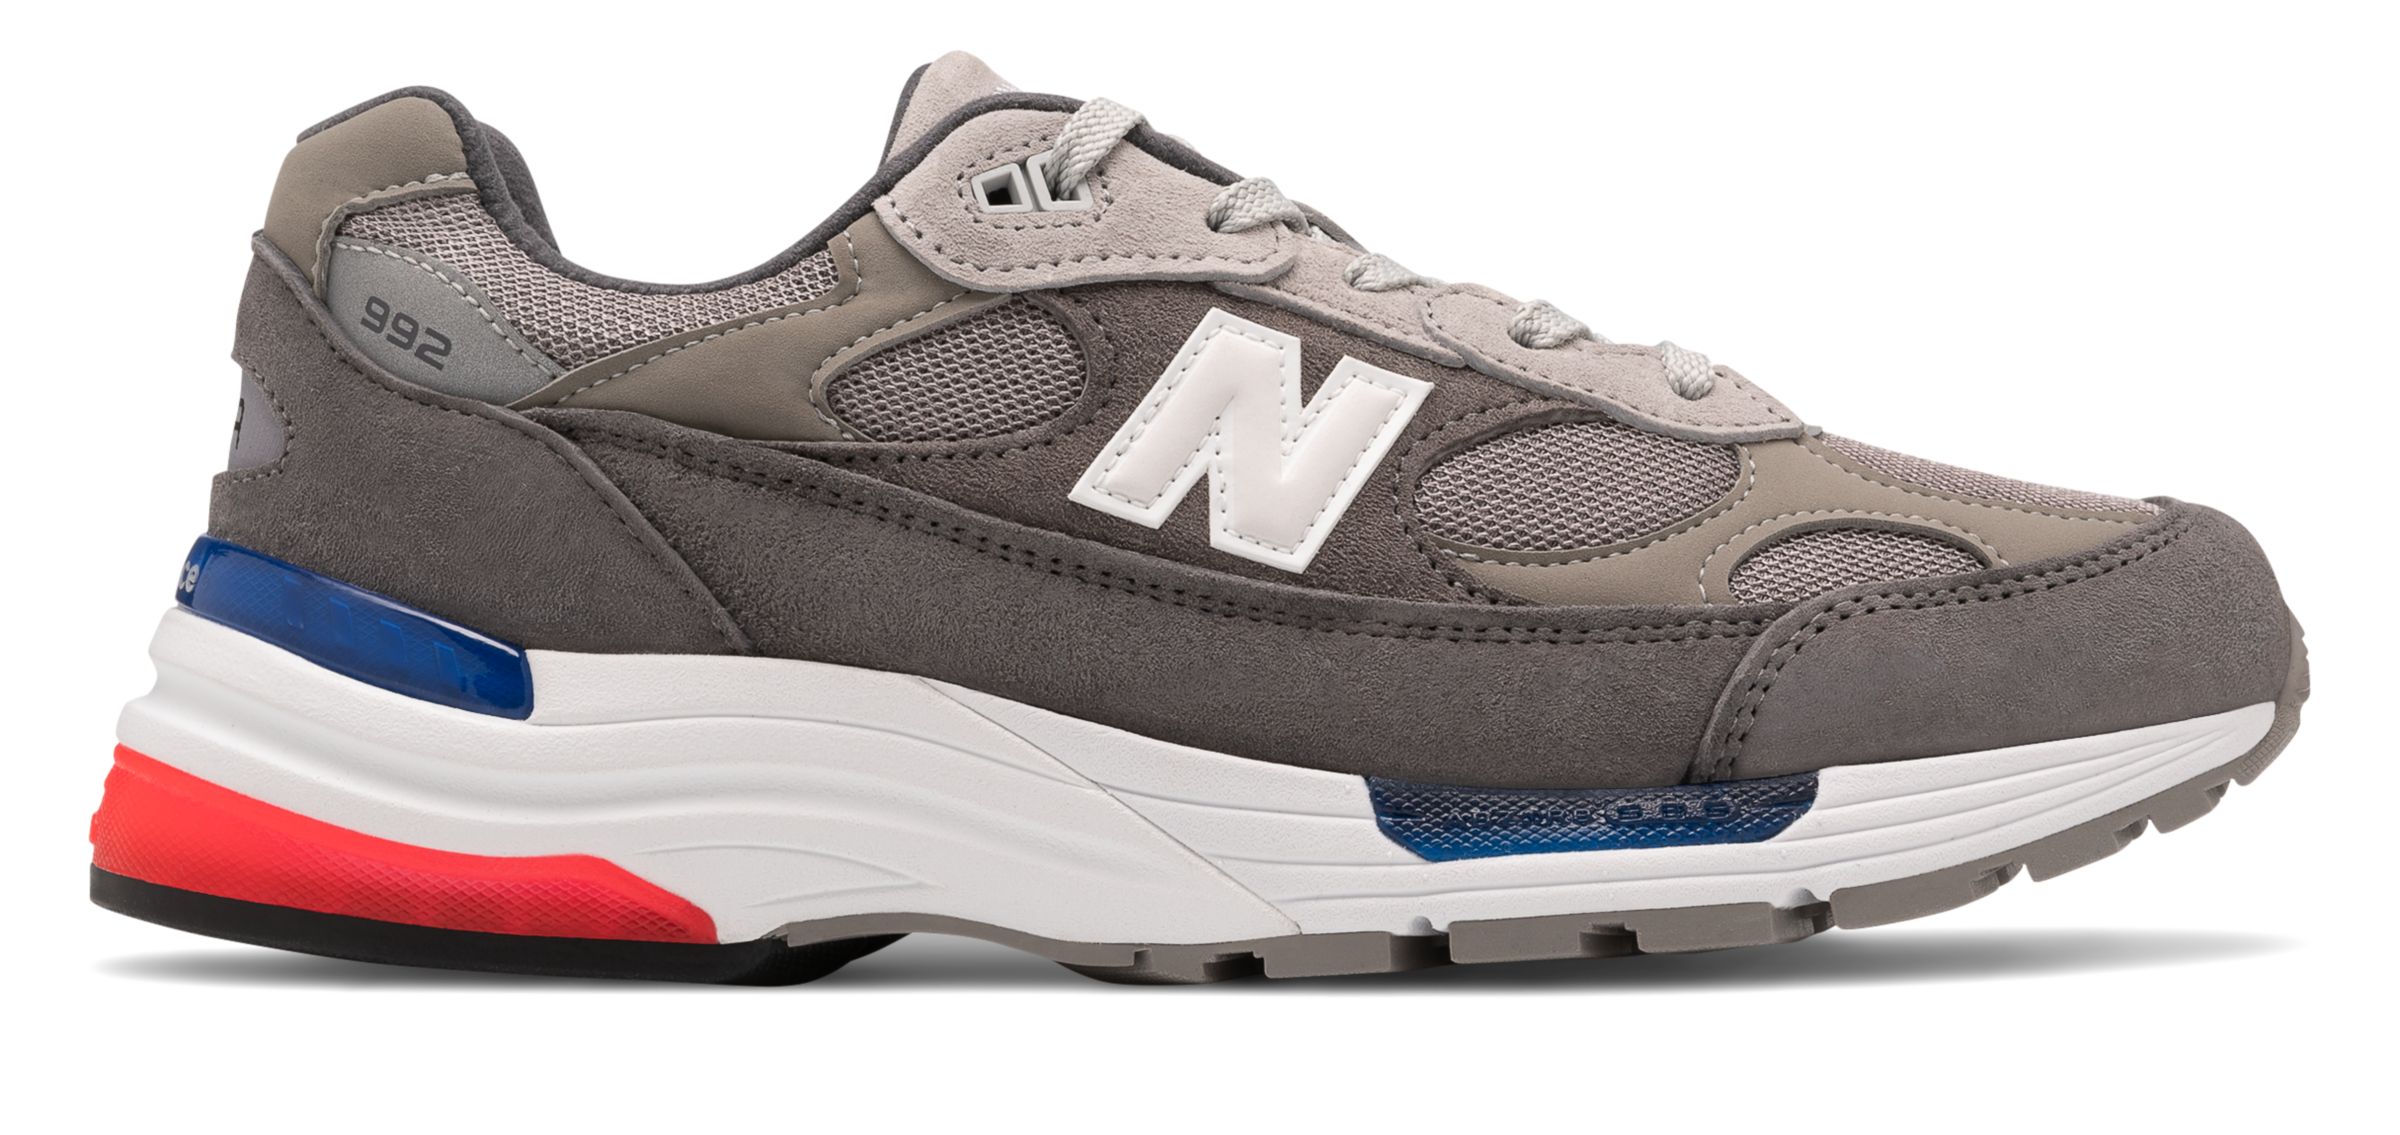 new balance shoes made in usa